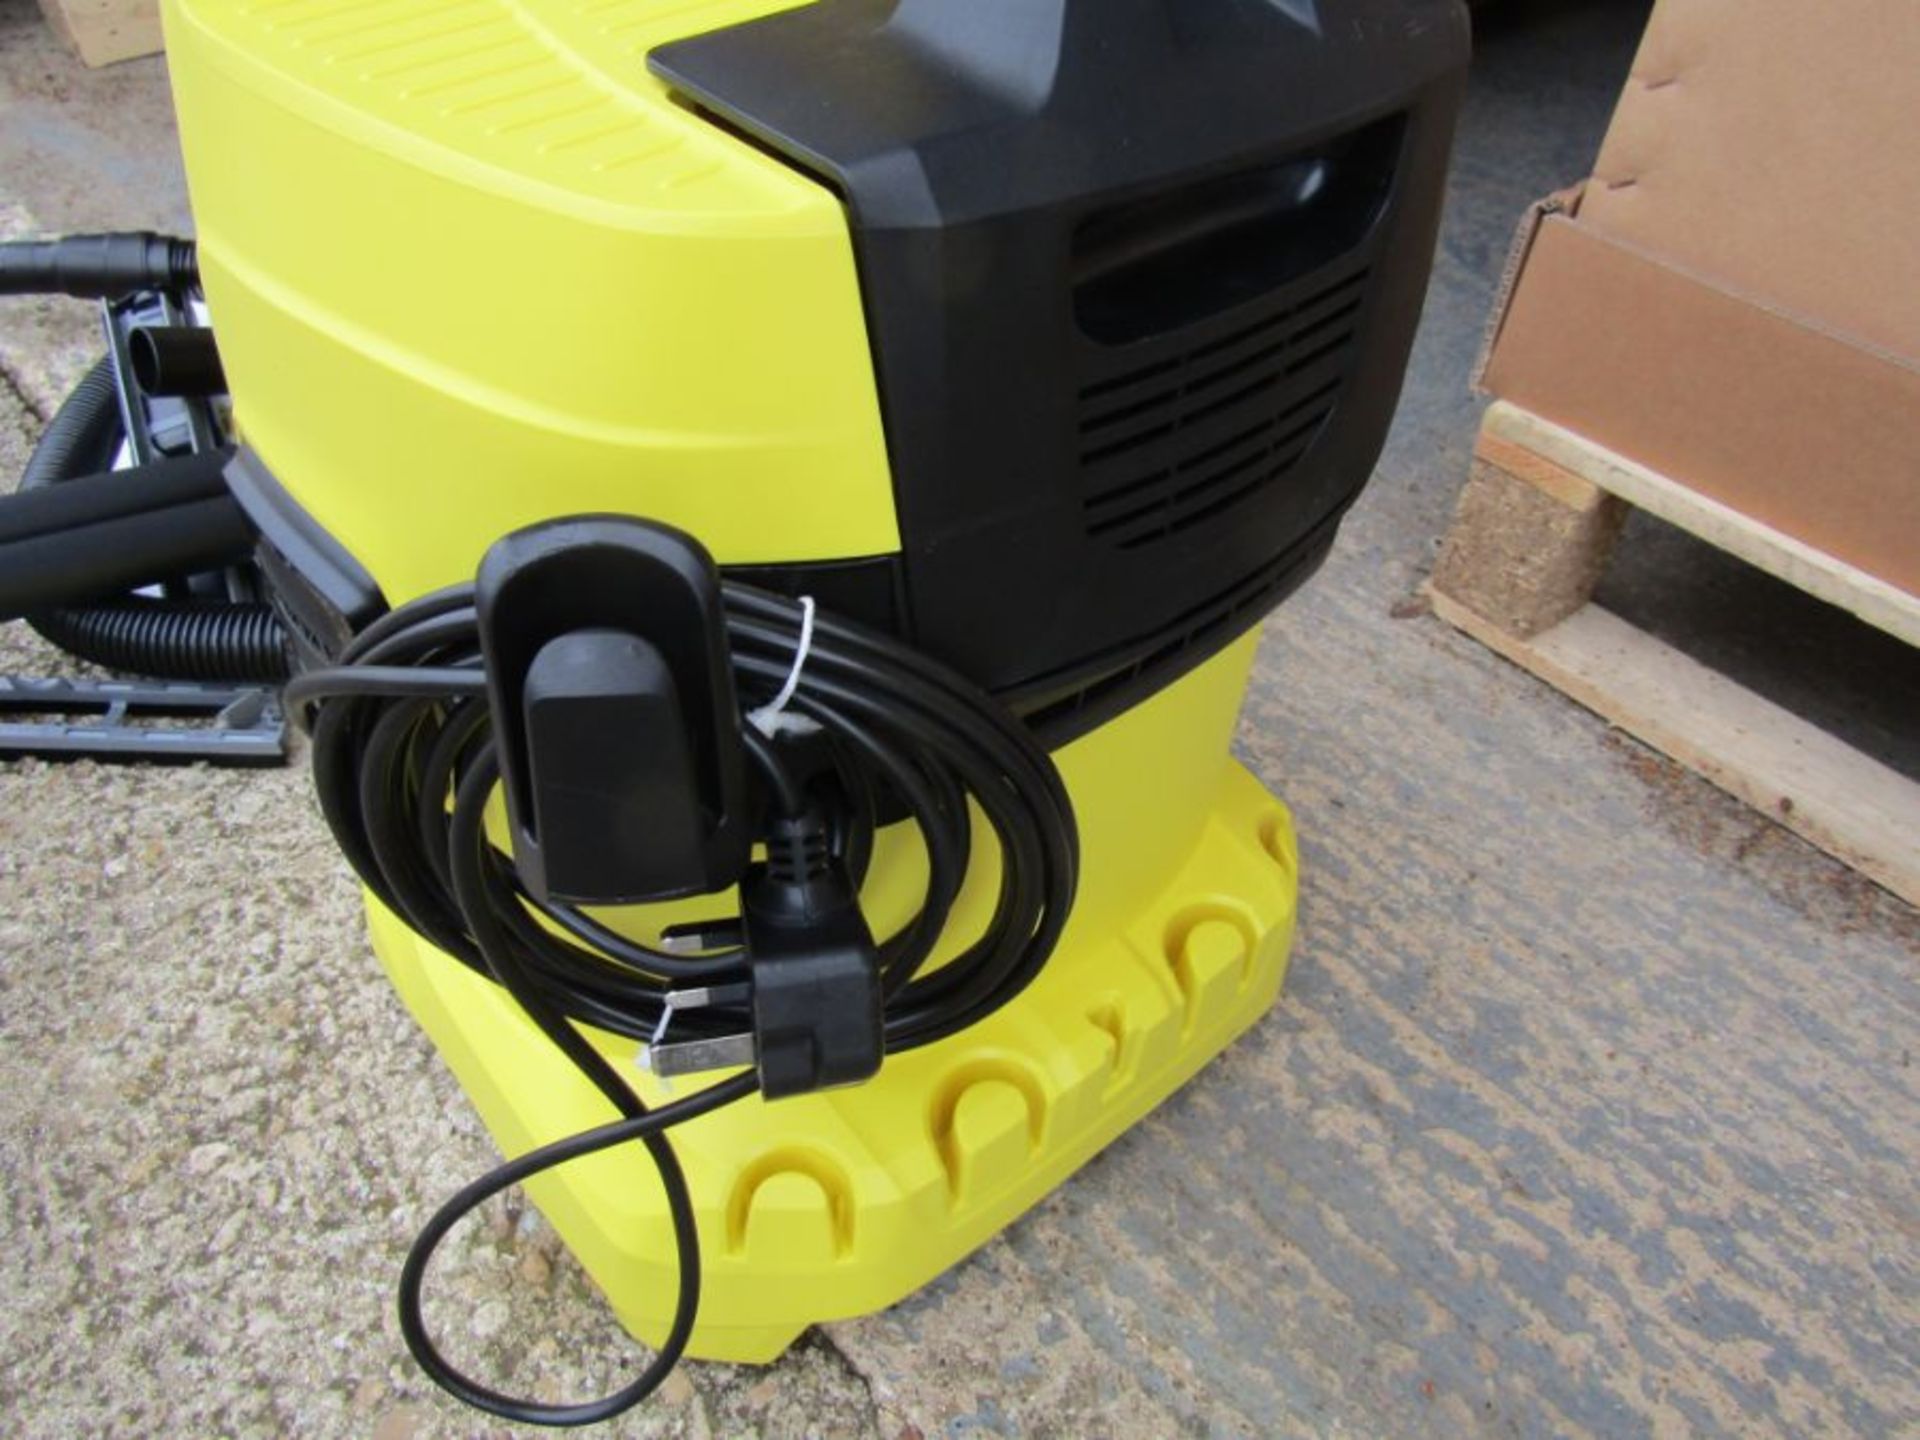 Karcher WD 4 Wet and Dry Vacuum Cleaner - Yellow - UK Plug Blk 1931654 - Image 2 of 6